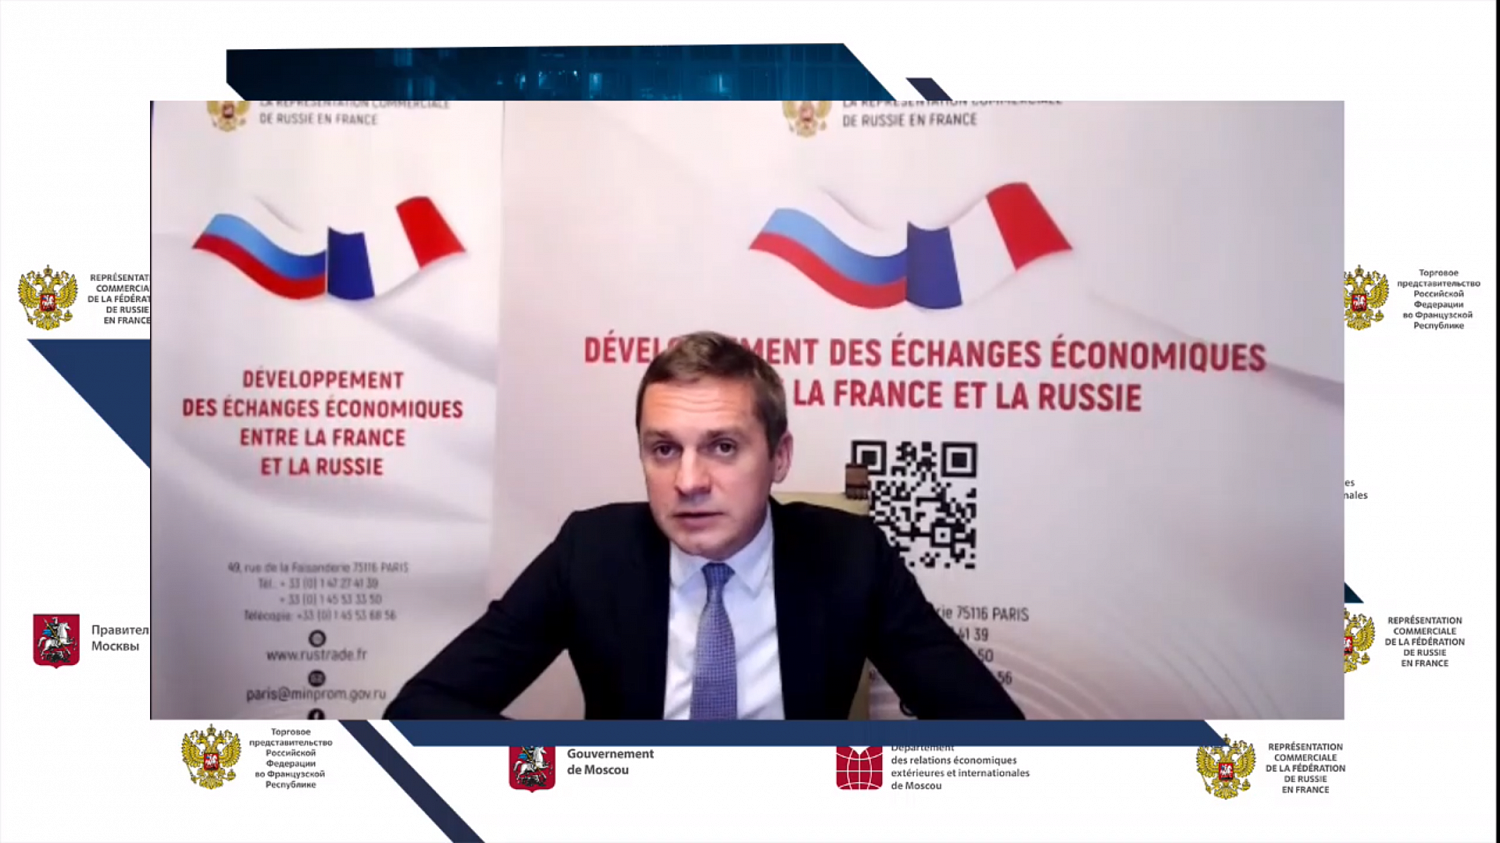 Moscow and France converged on approach to digitaliization